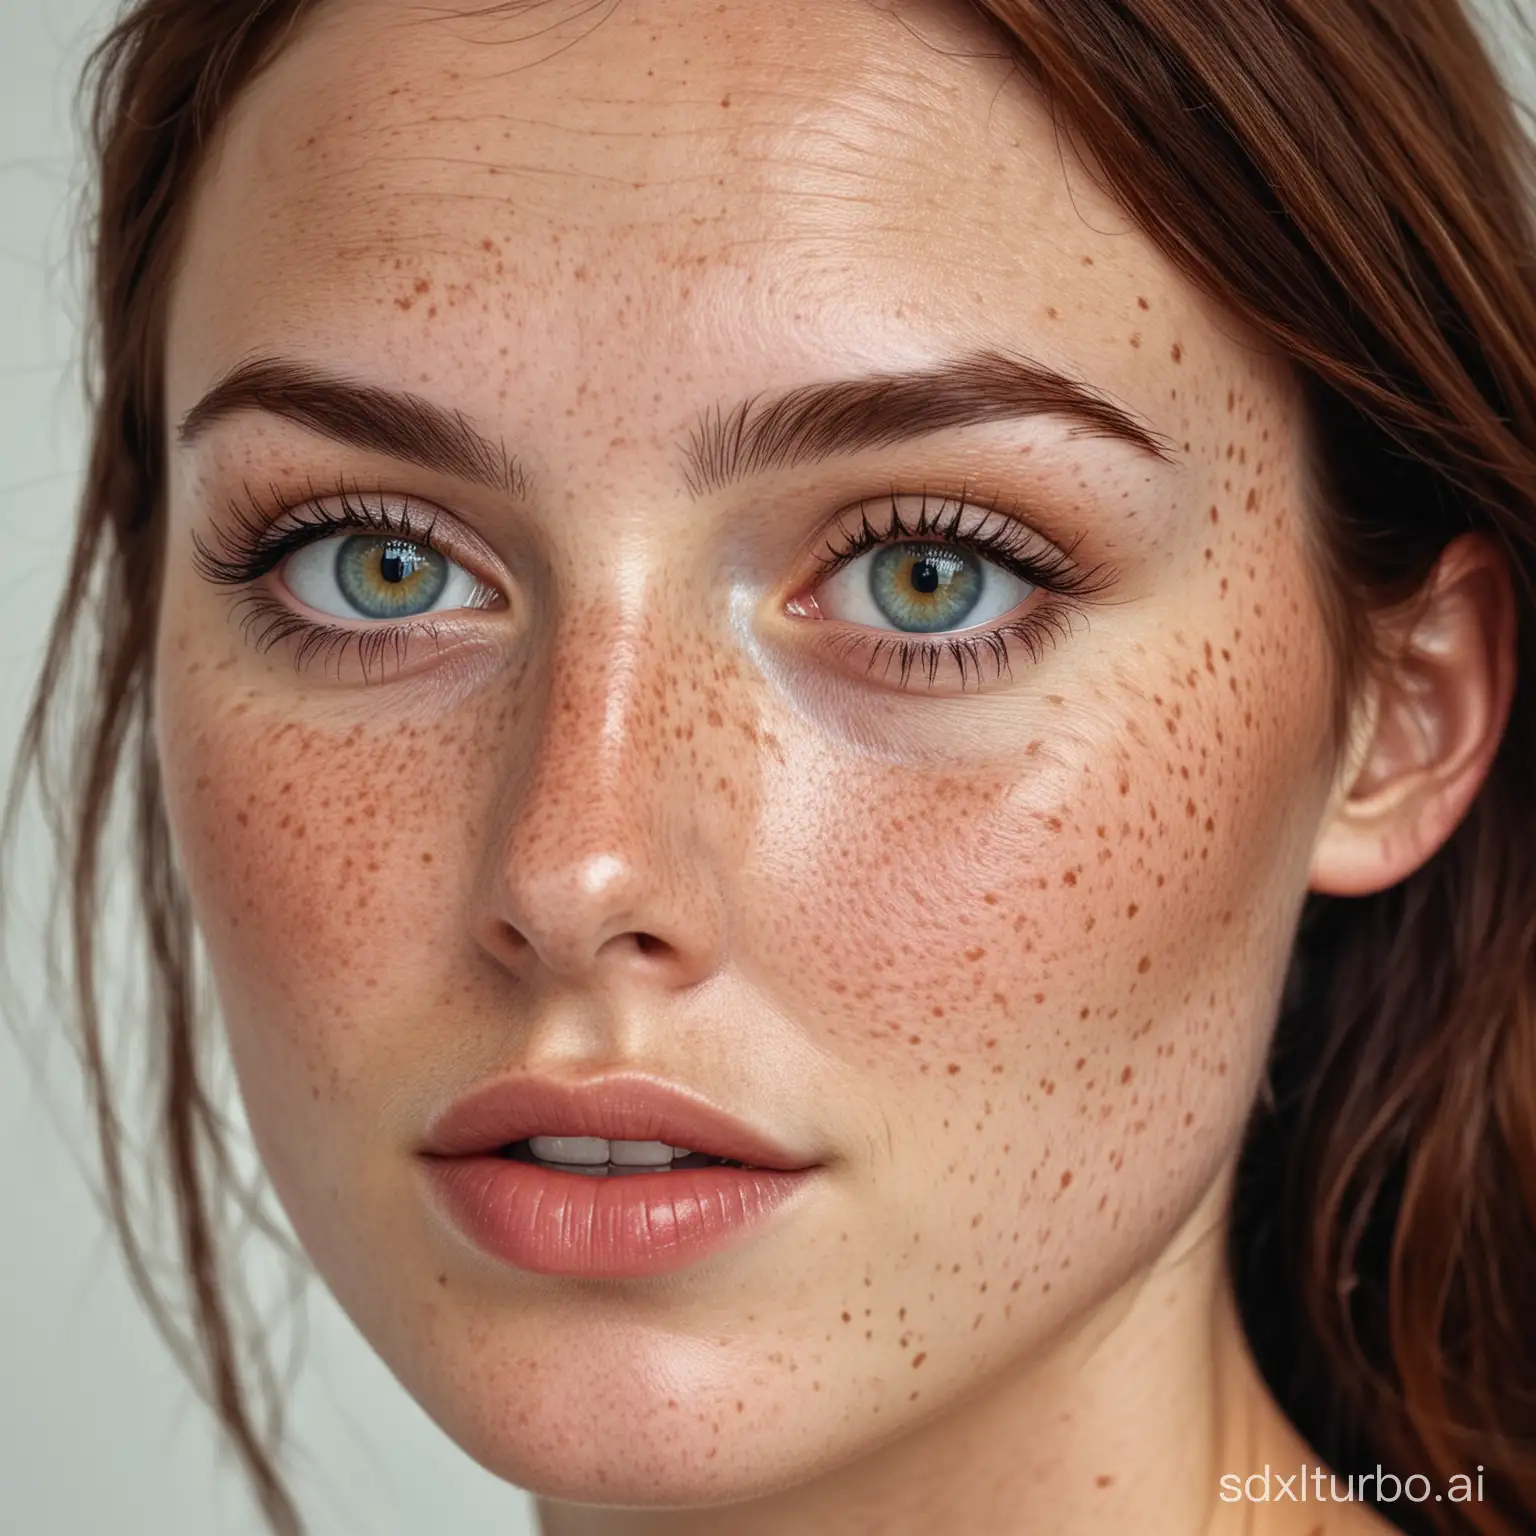 Sophisticated-European-Woman-with-Freckles-Elegant-Portrait-of-a-Beautiful-Woman